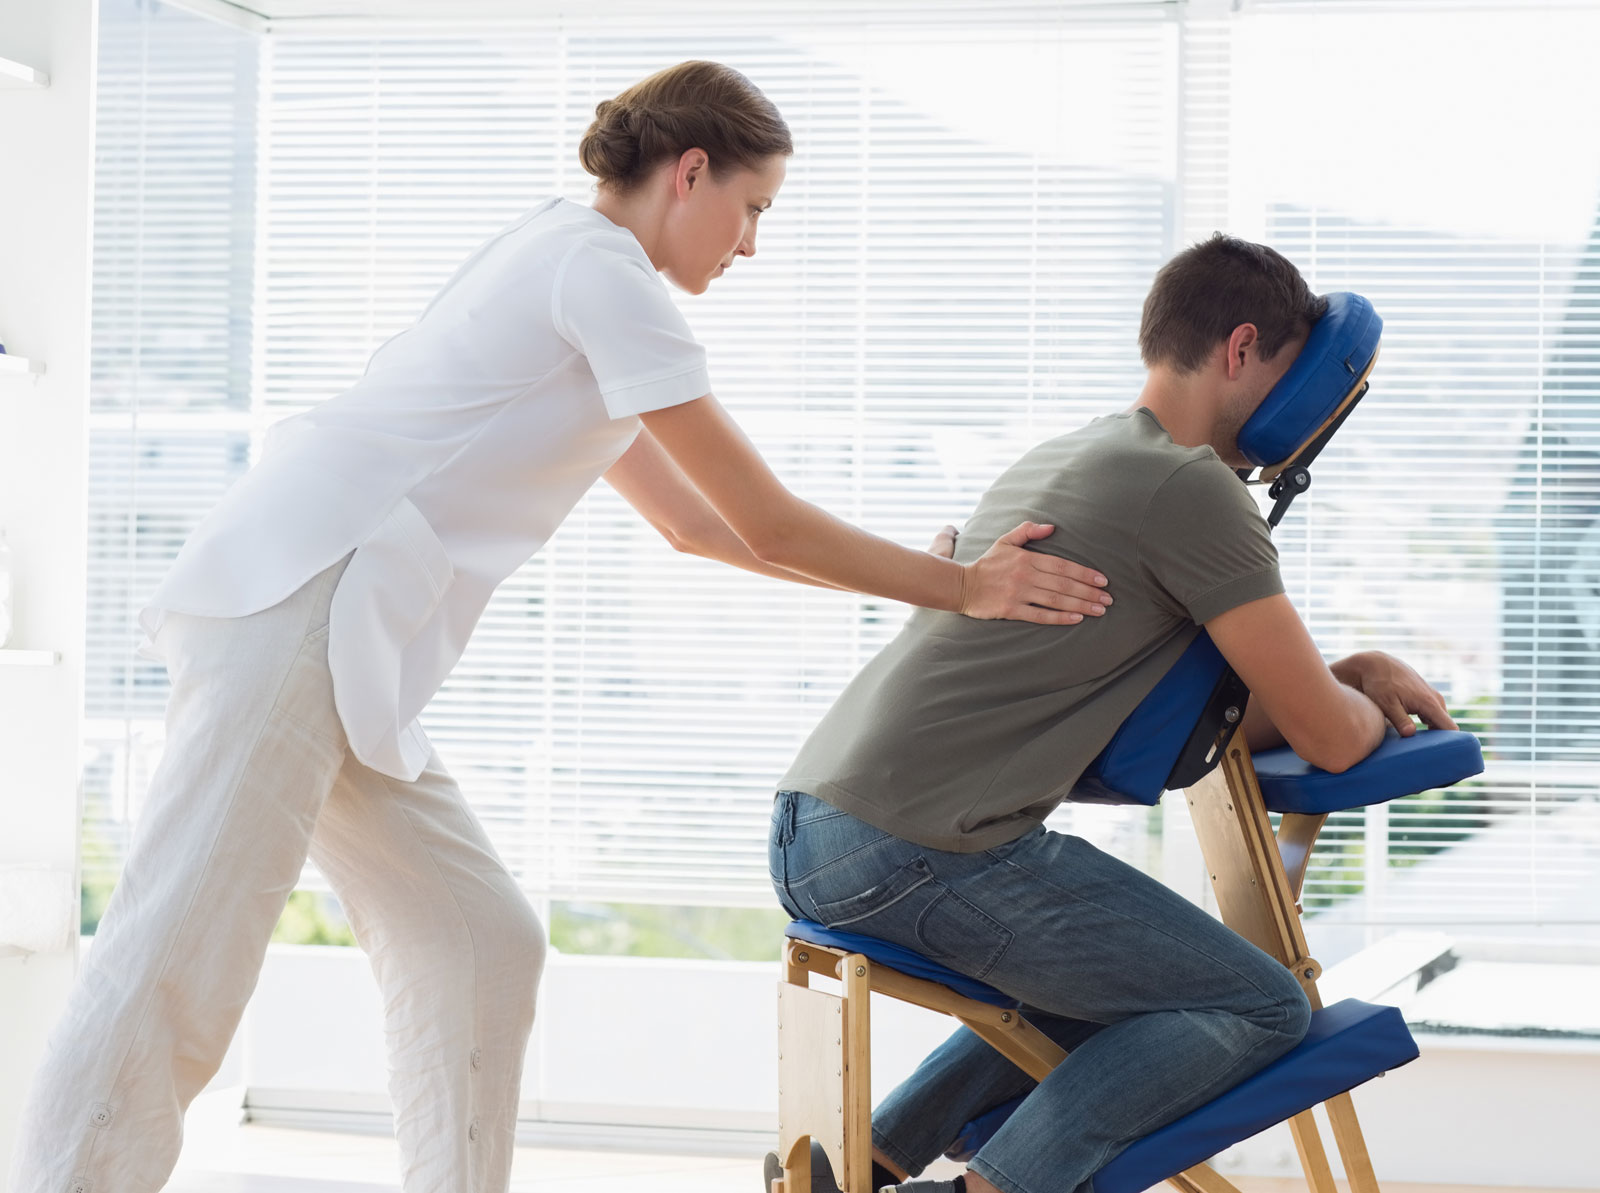 What's the Different Between Manual Therapy and Massage Therapy